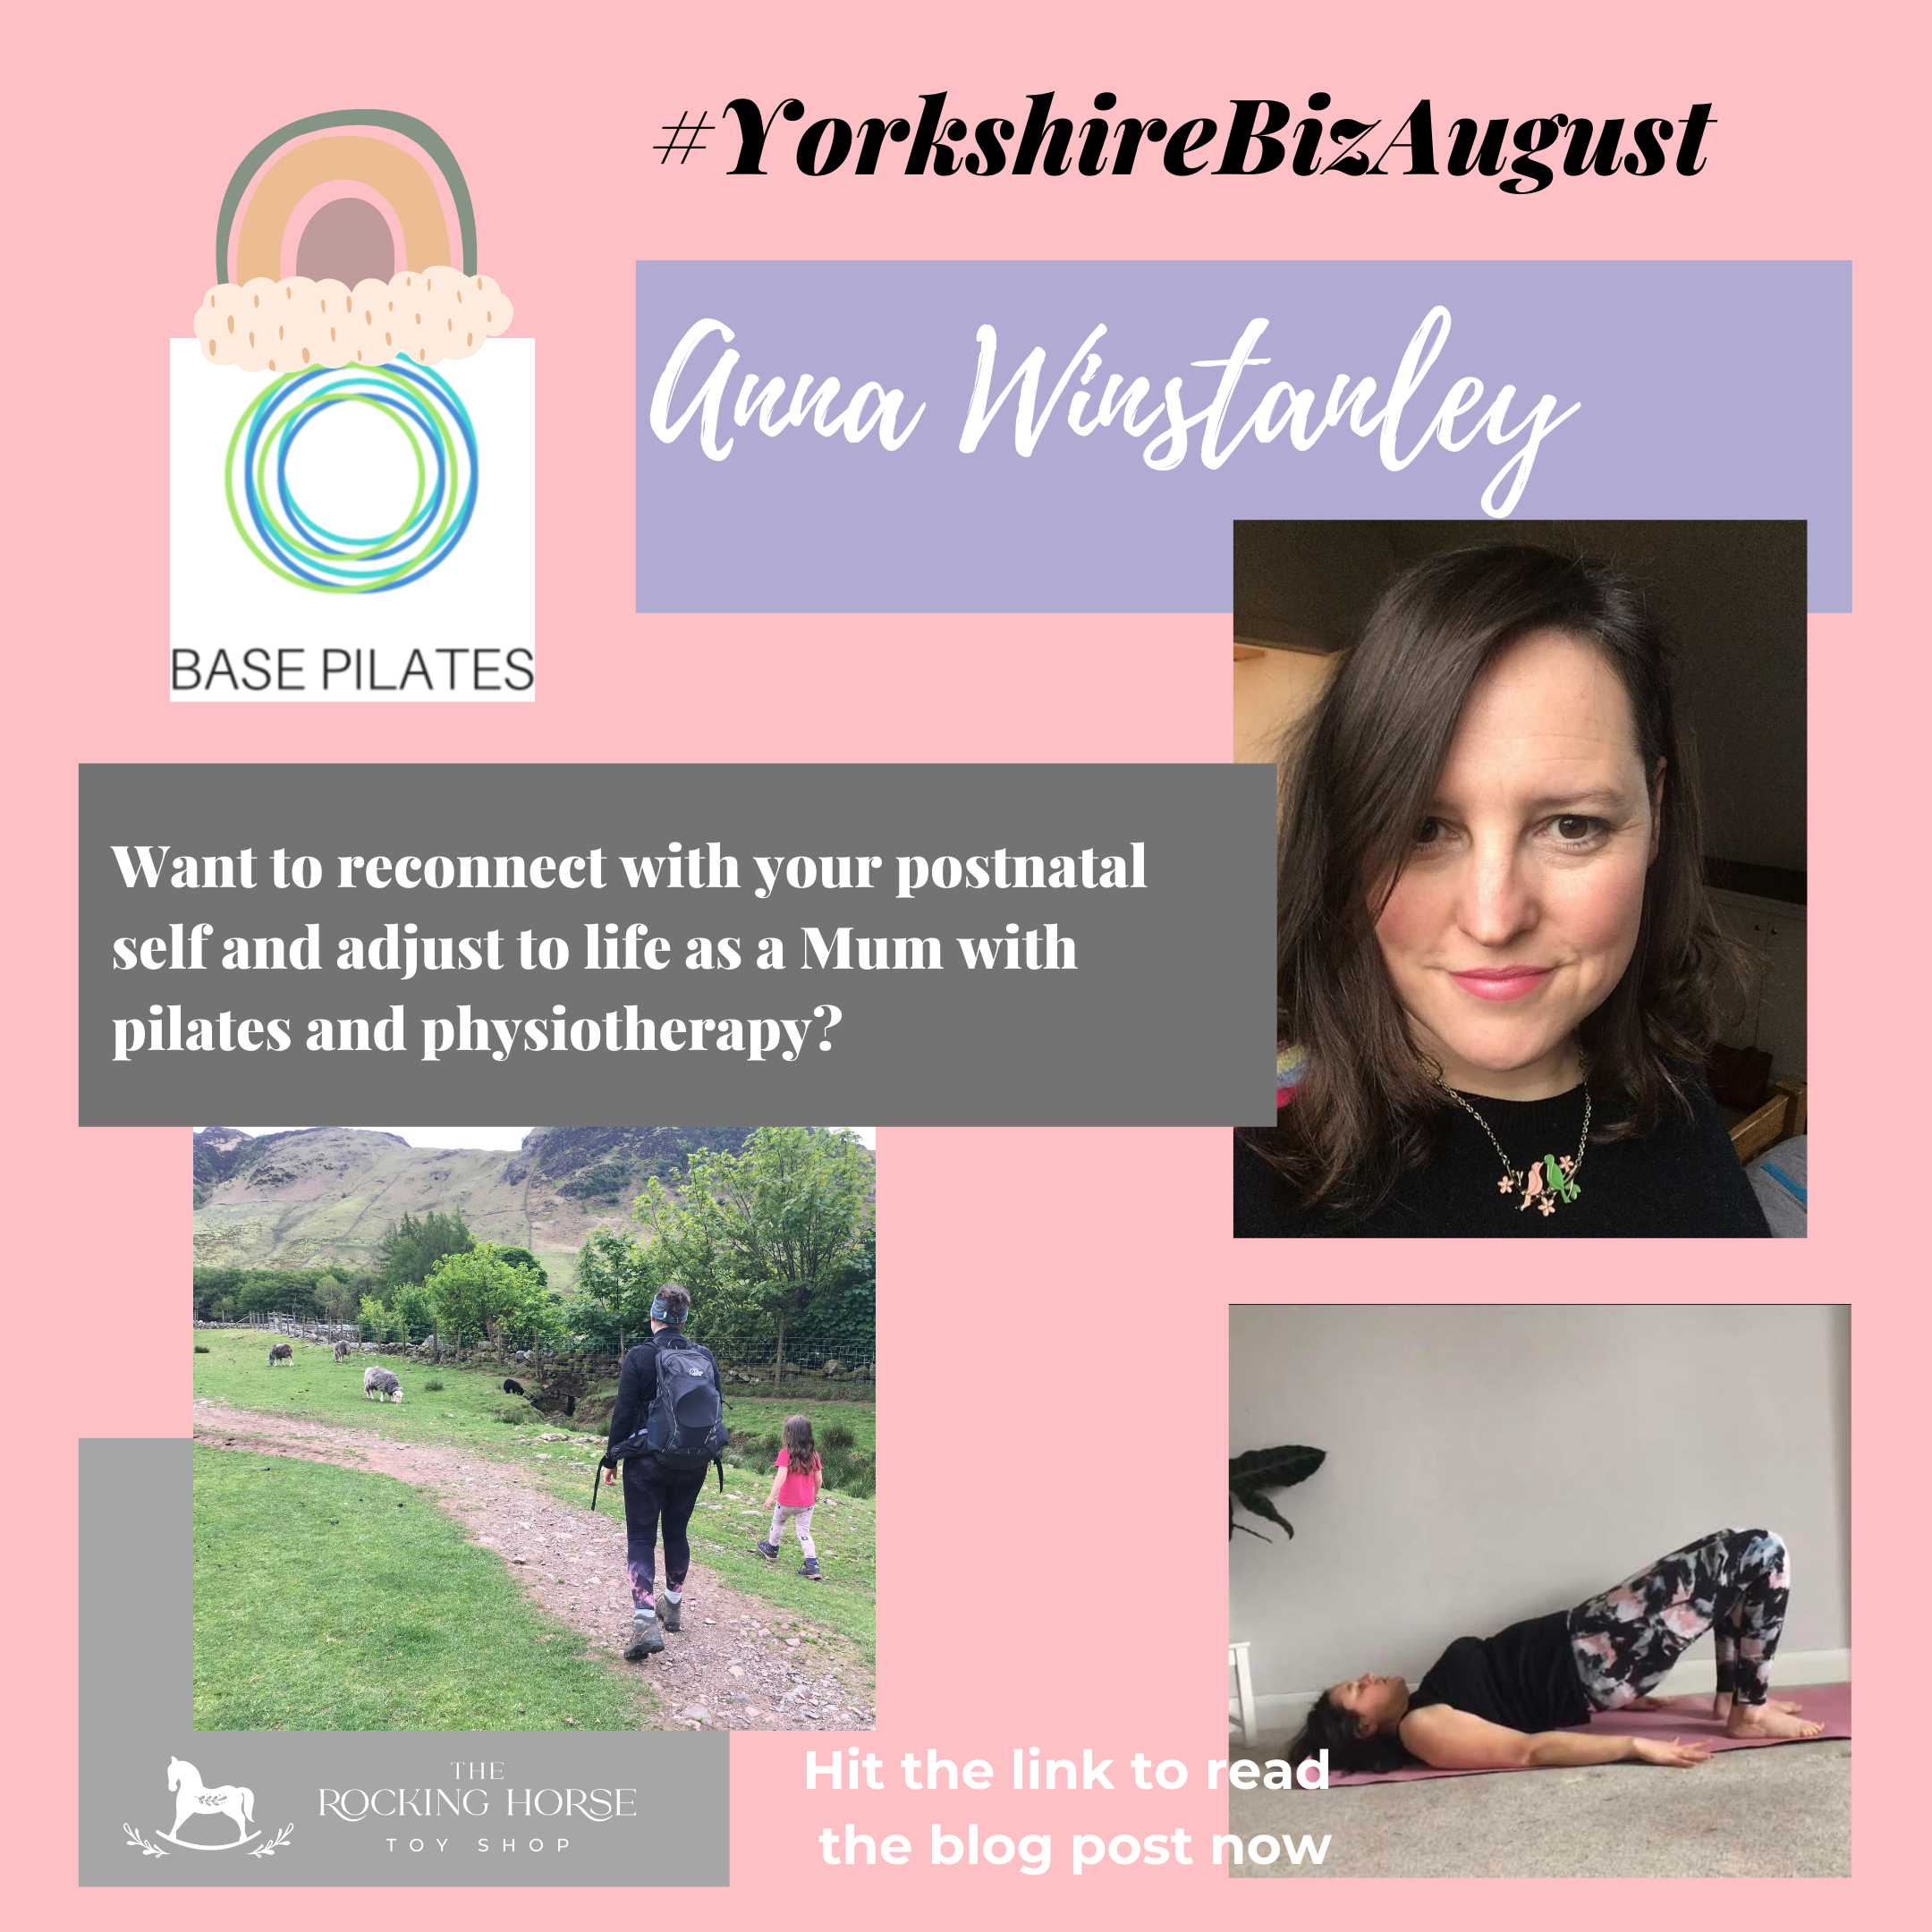 Yorkshire Biz August 09 - Anna Winstanley - Base Pilates & Physiotherapy